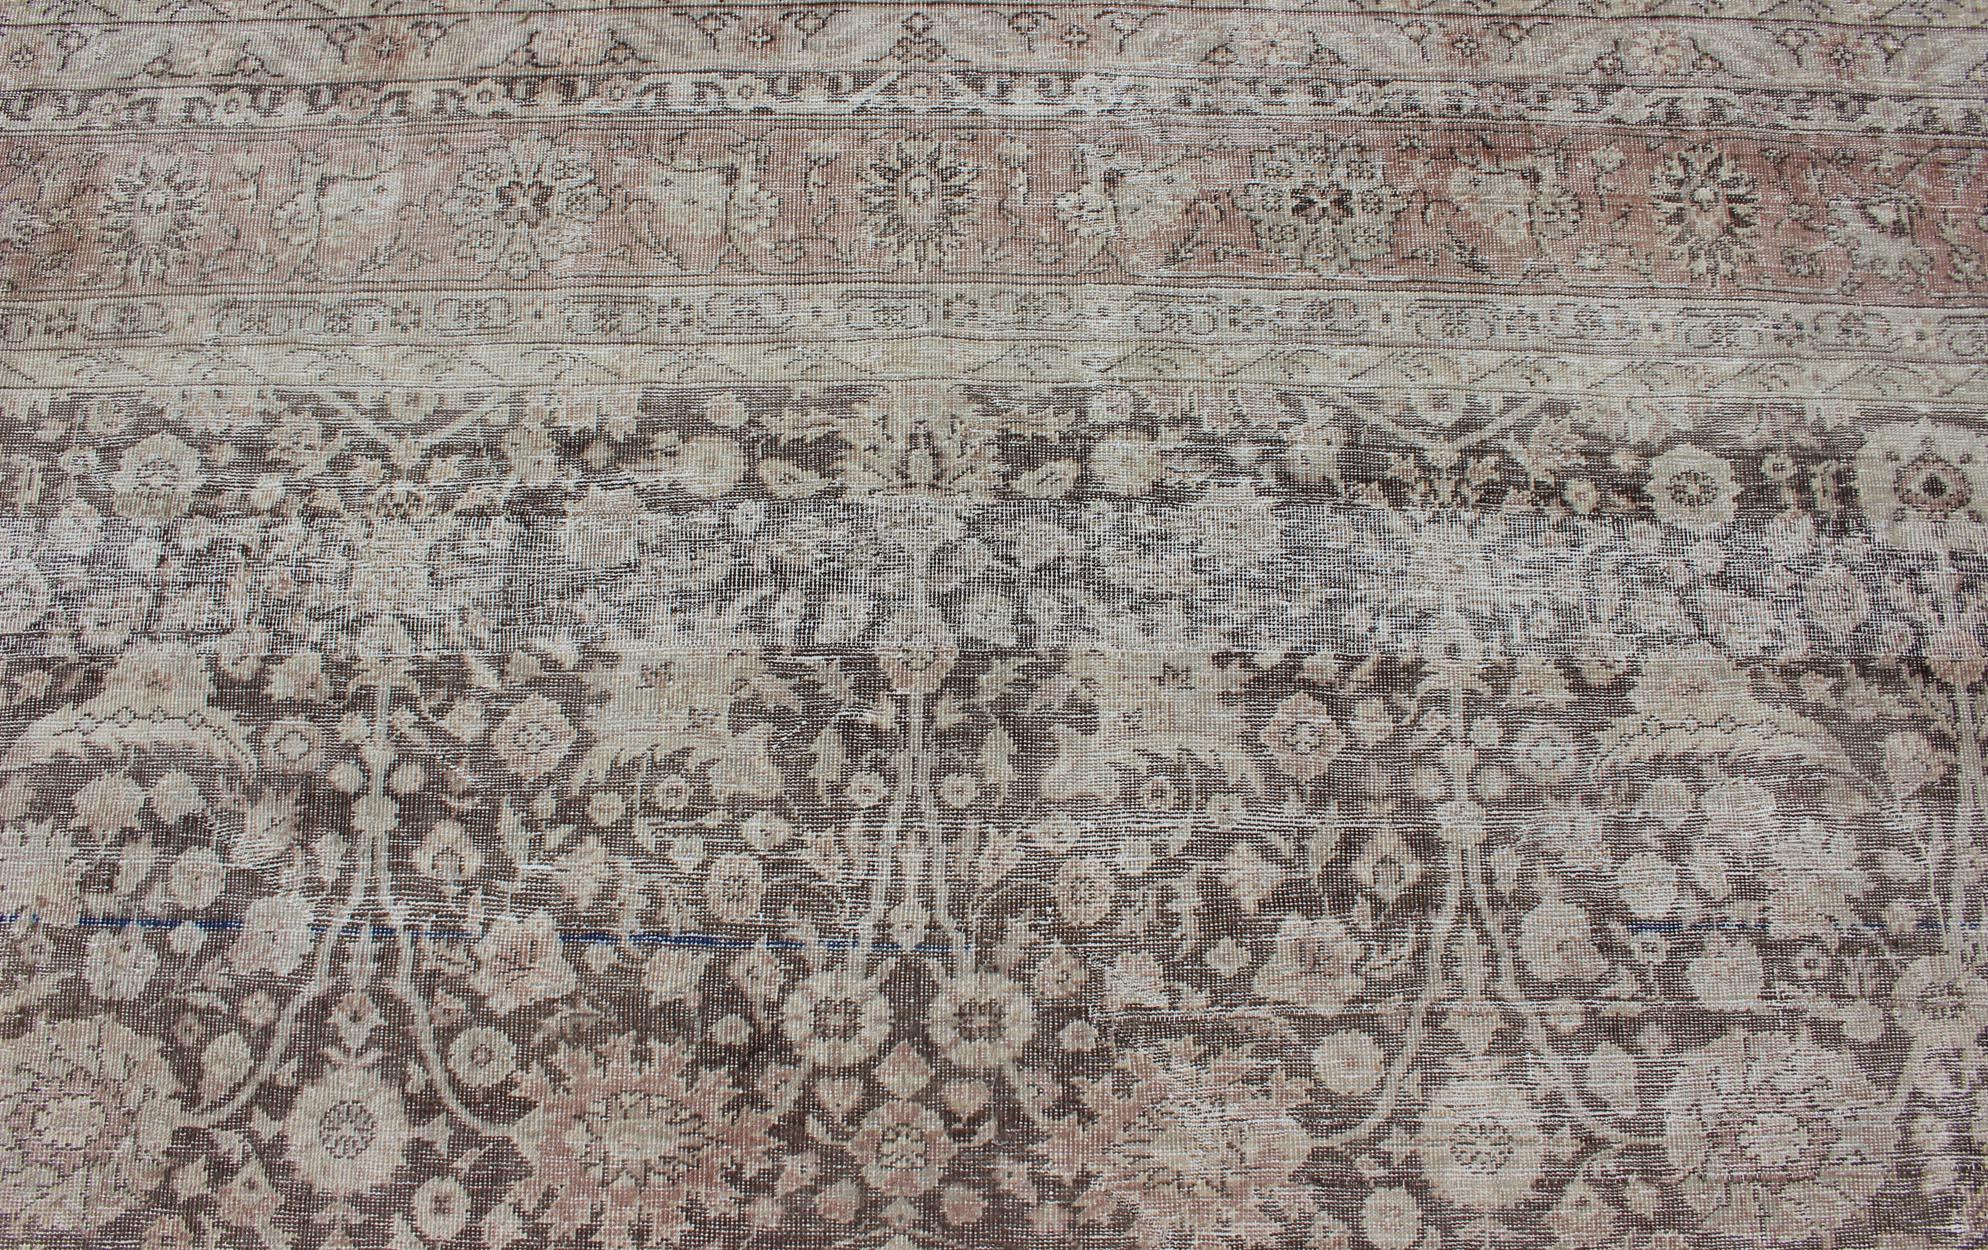 Antique Turkish Oushak Rug with All-Over Floral Design in Earth Tones For Sale 4